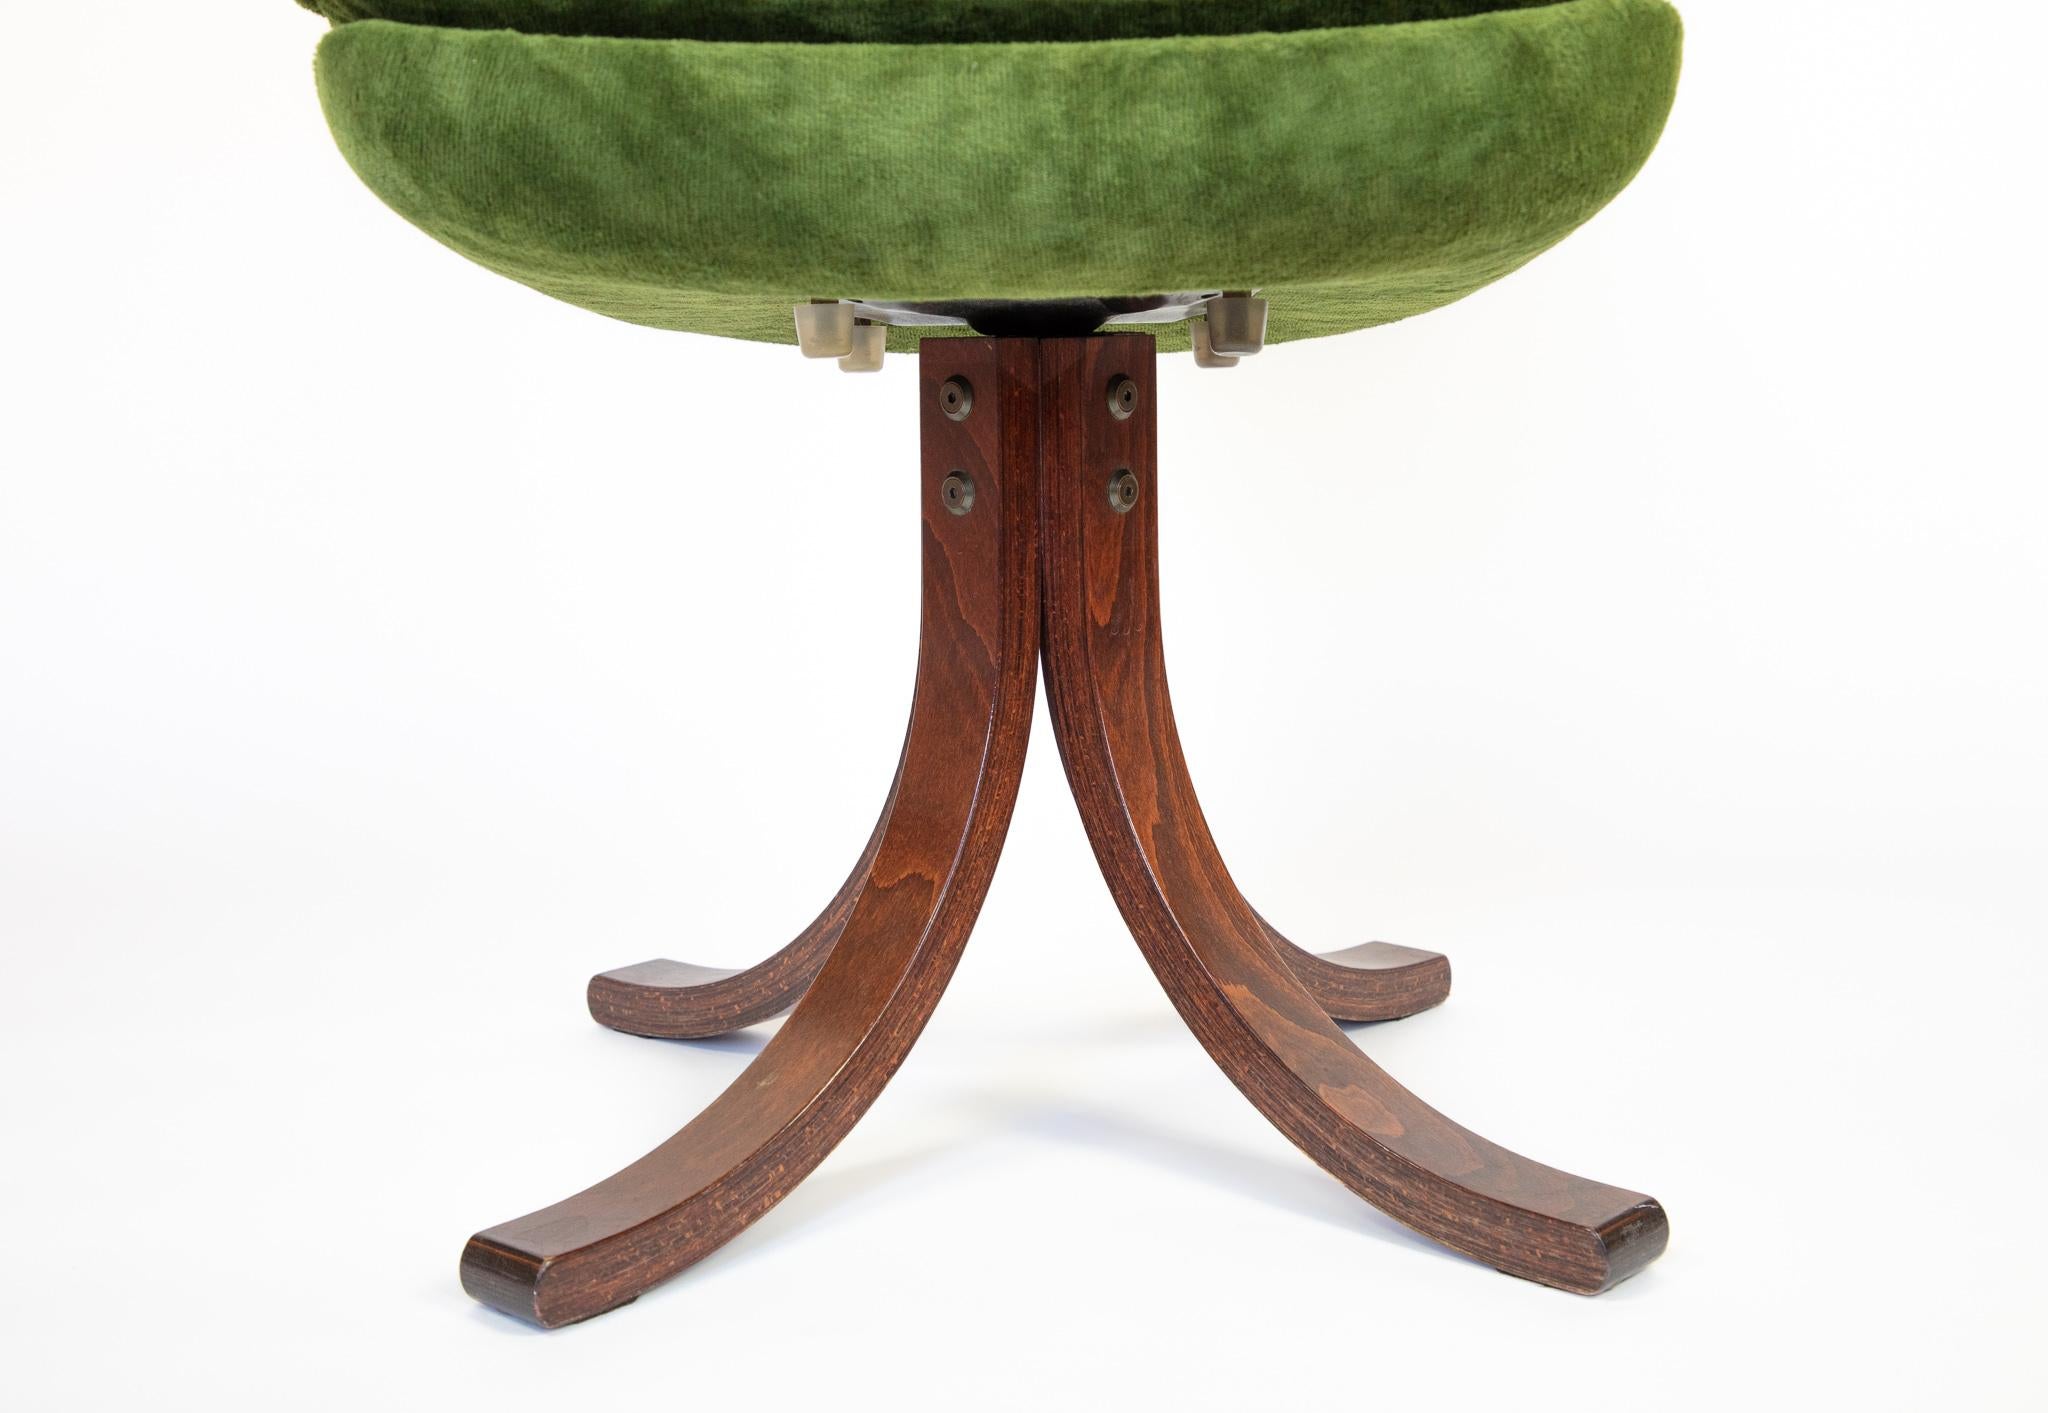 Late 20th Century Mid Century Modern Dining Chairs in Green Velvet Upholstery, Italy, 1970s For Sale